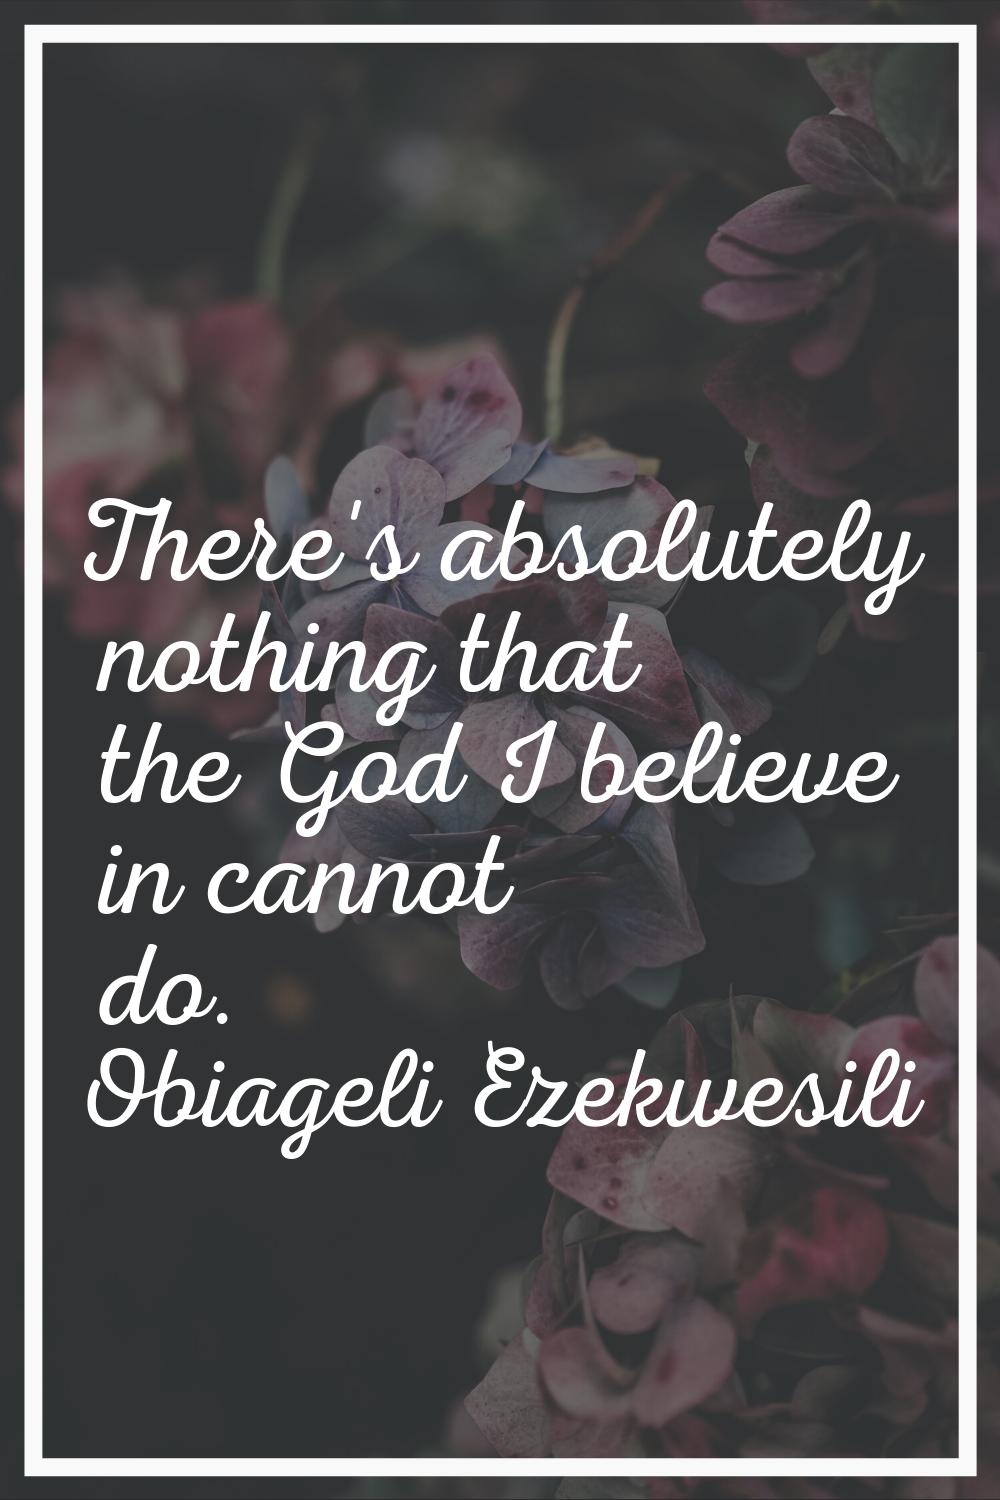 There's absolutely nothing that the God I believe in cannot do.